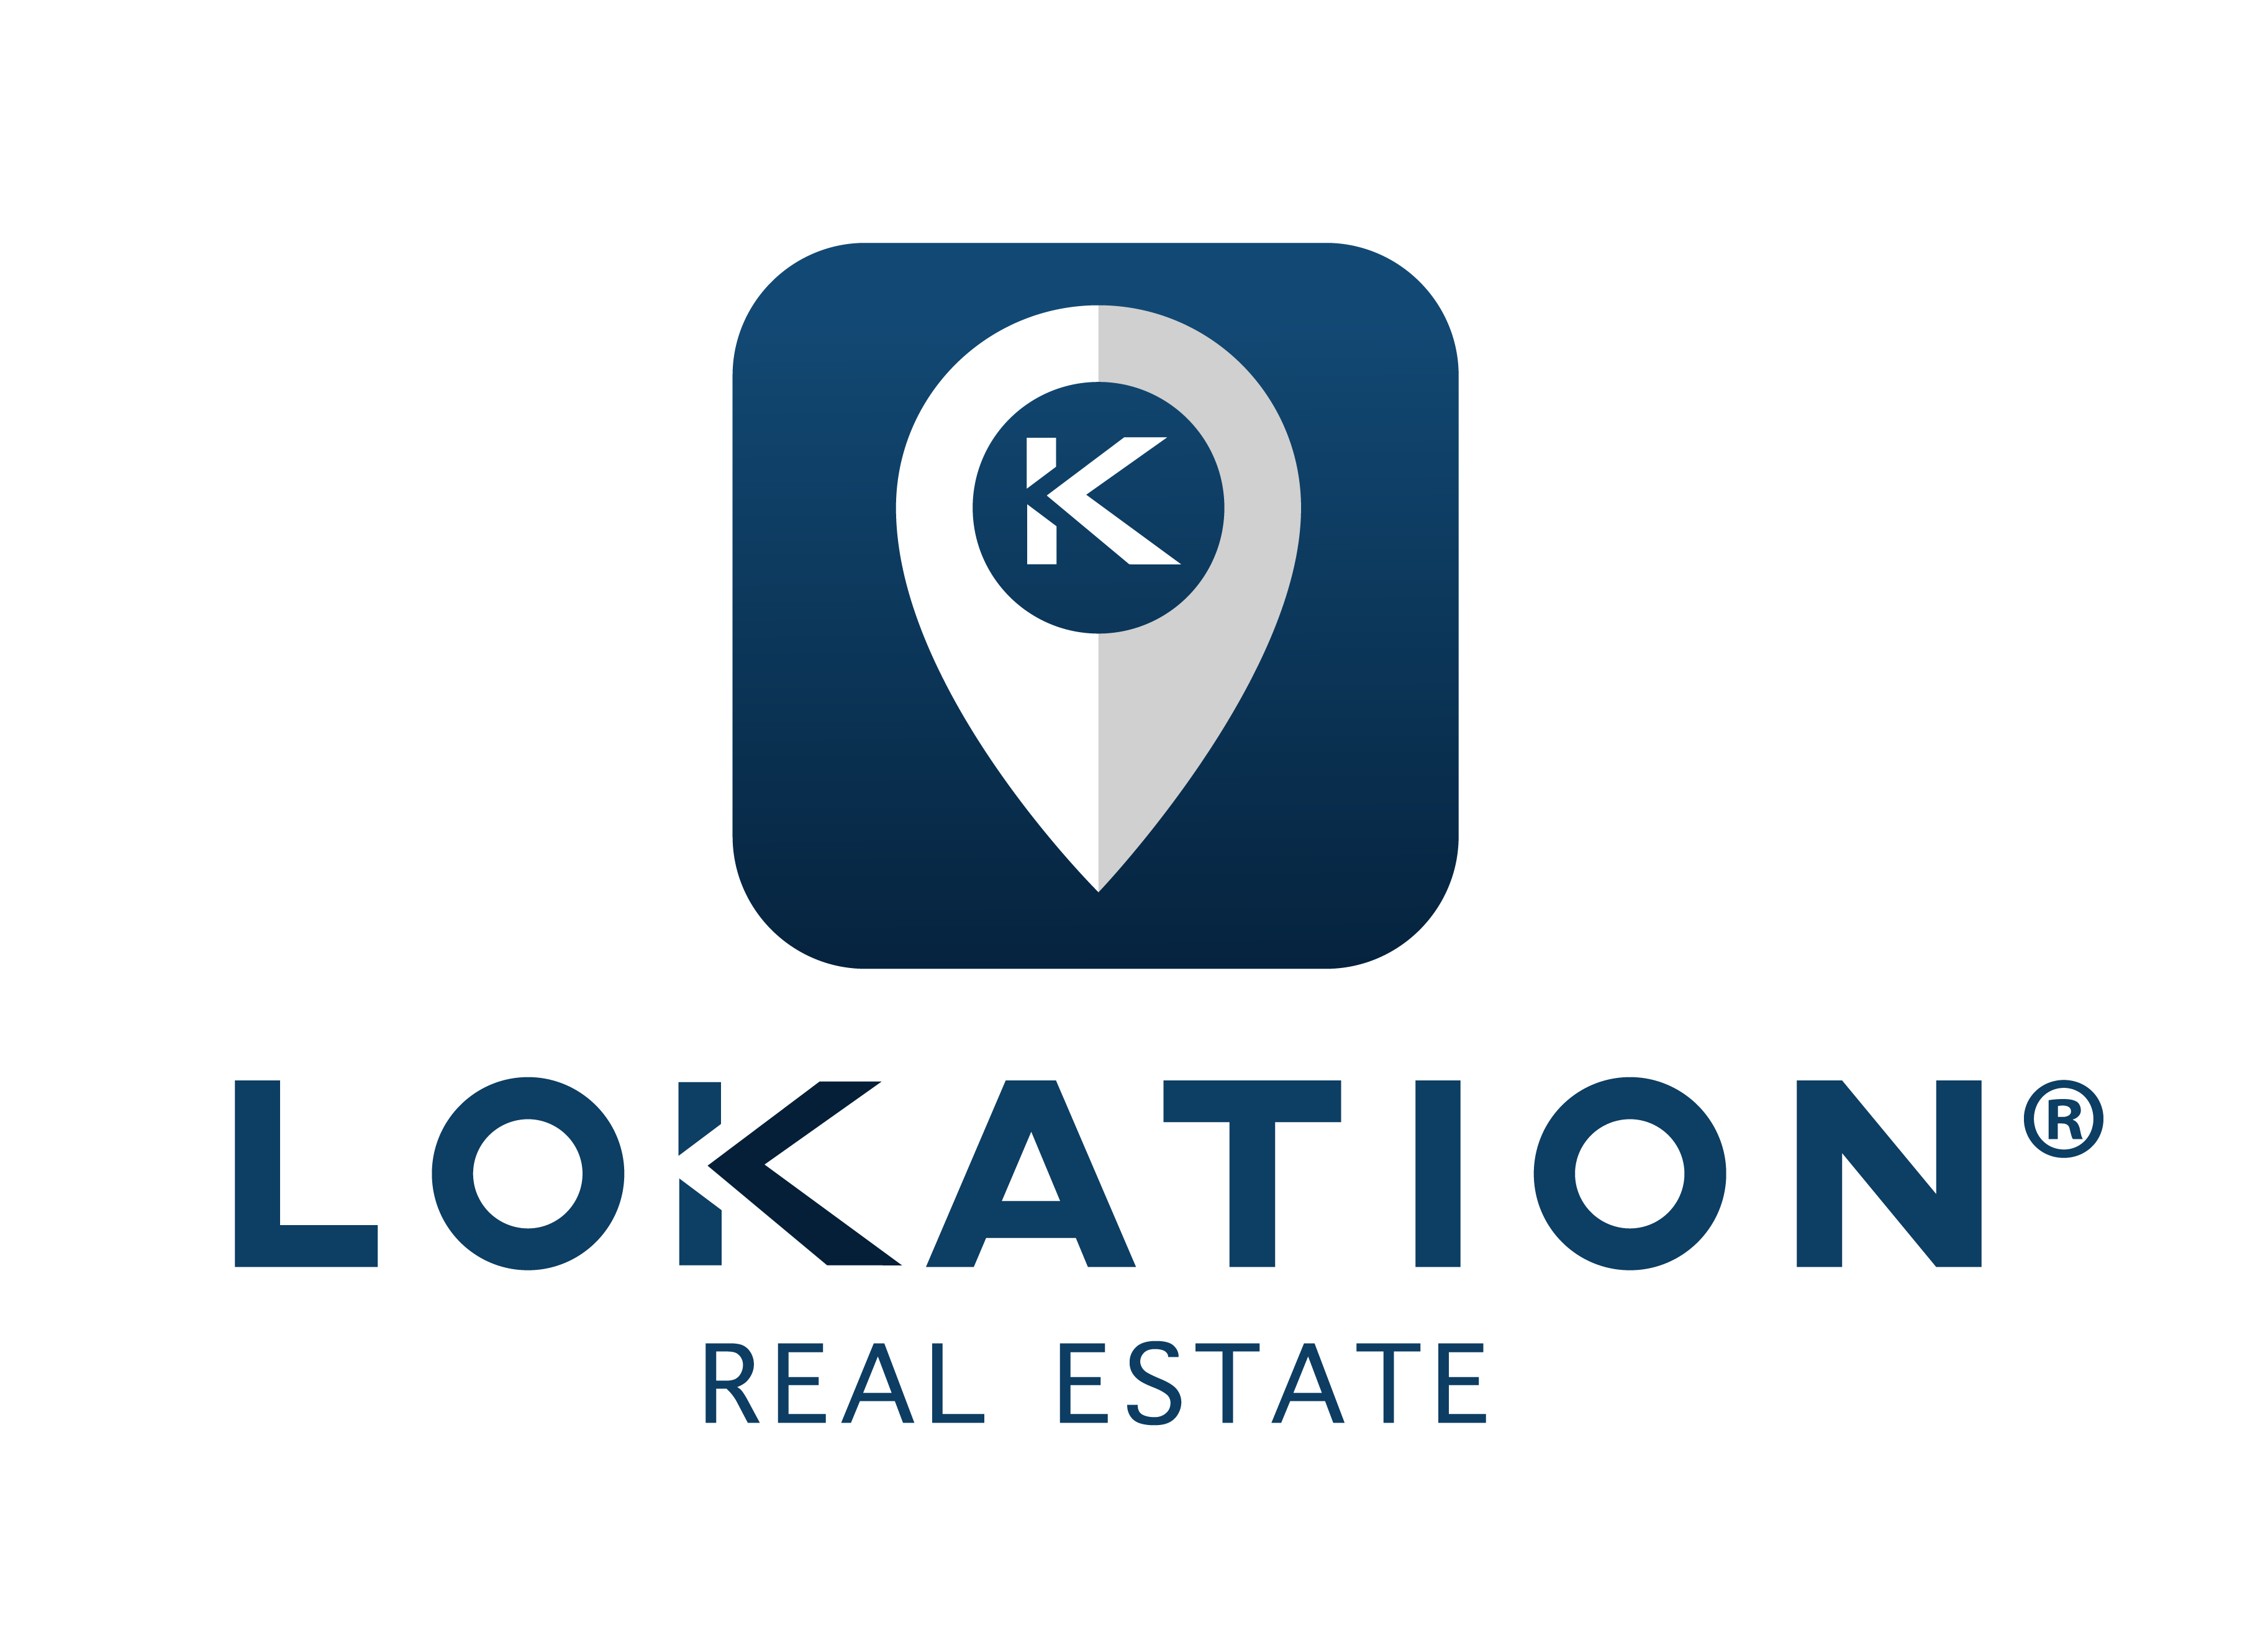 Everything You Need in One LoKation®